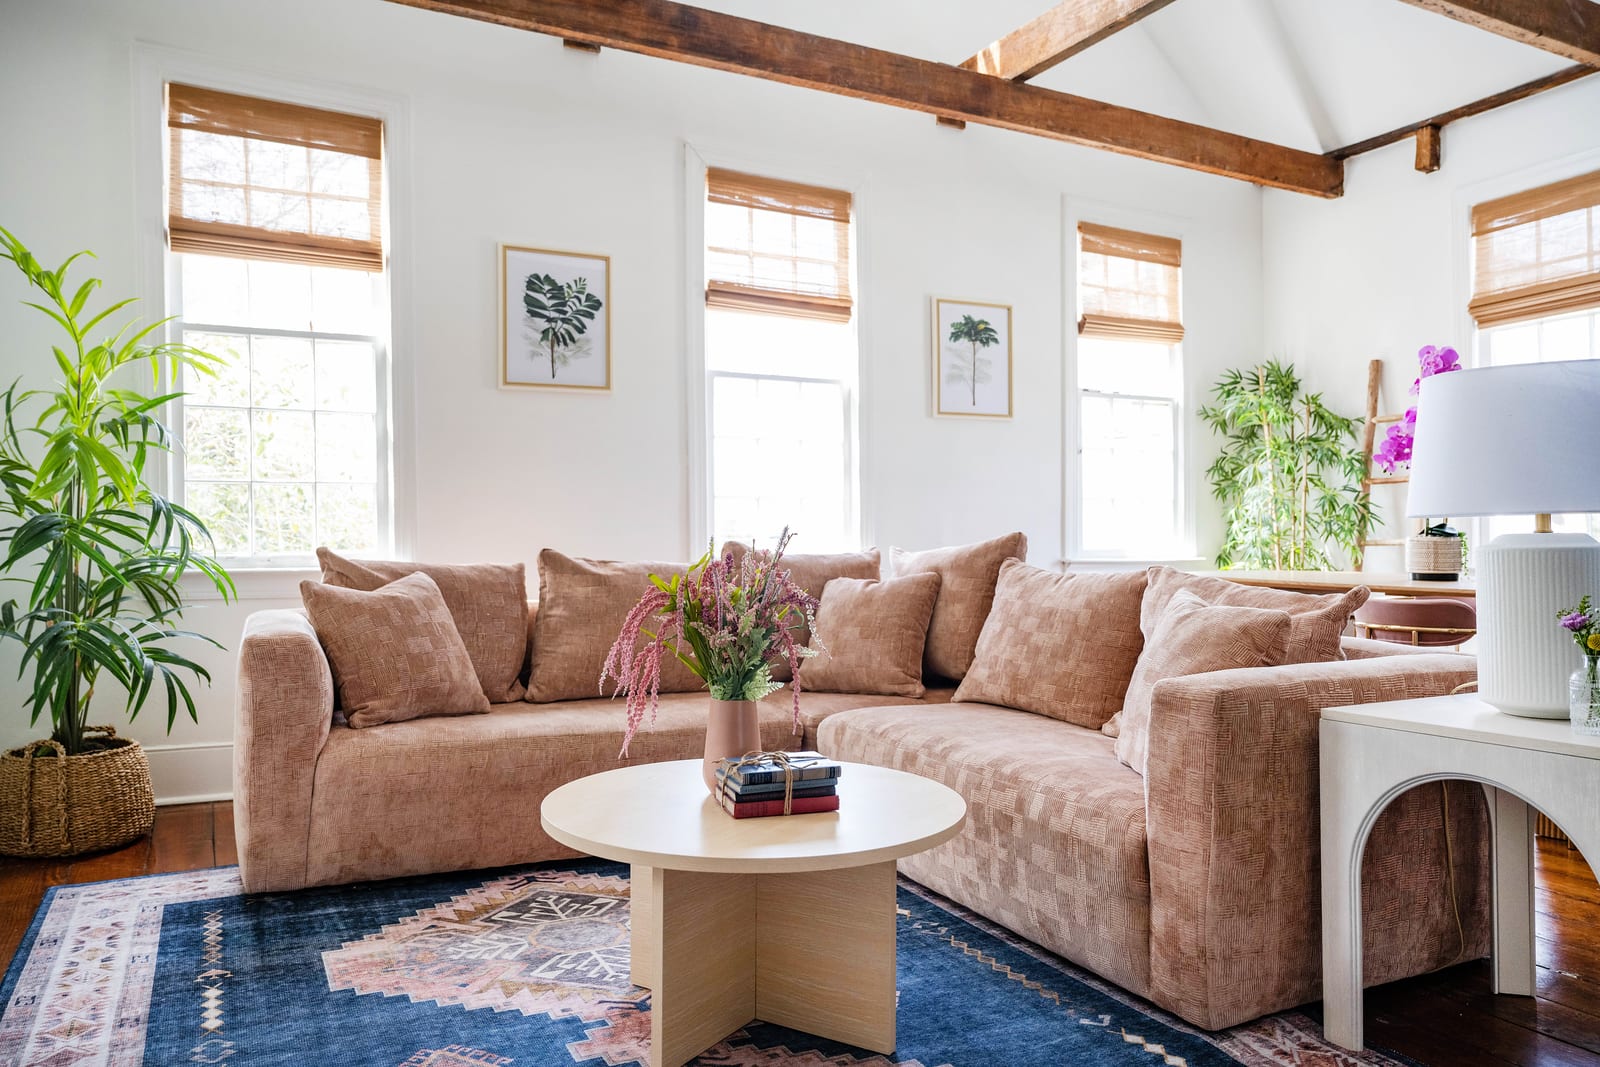 The living room allows for plenty of relaxation space for your group